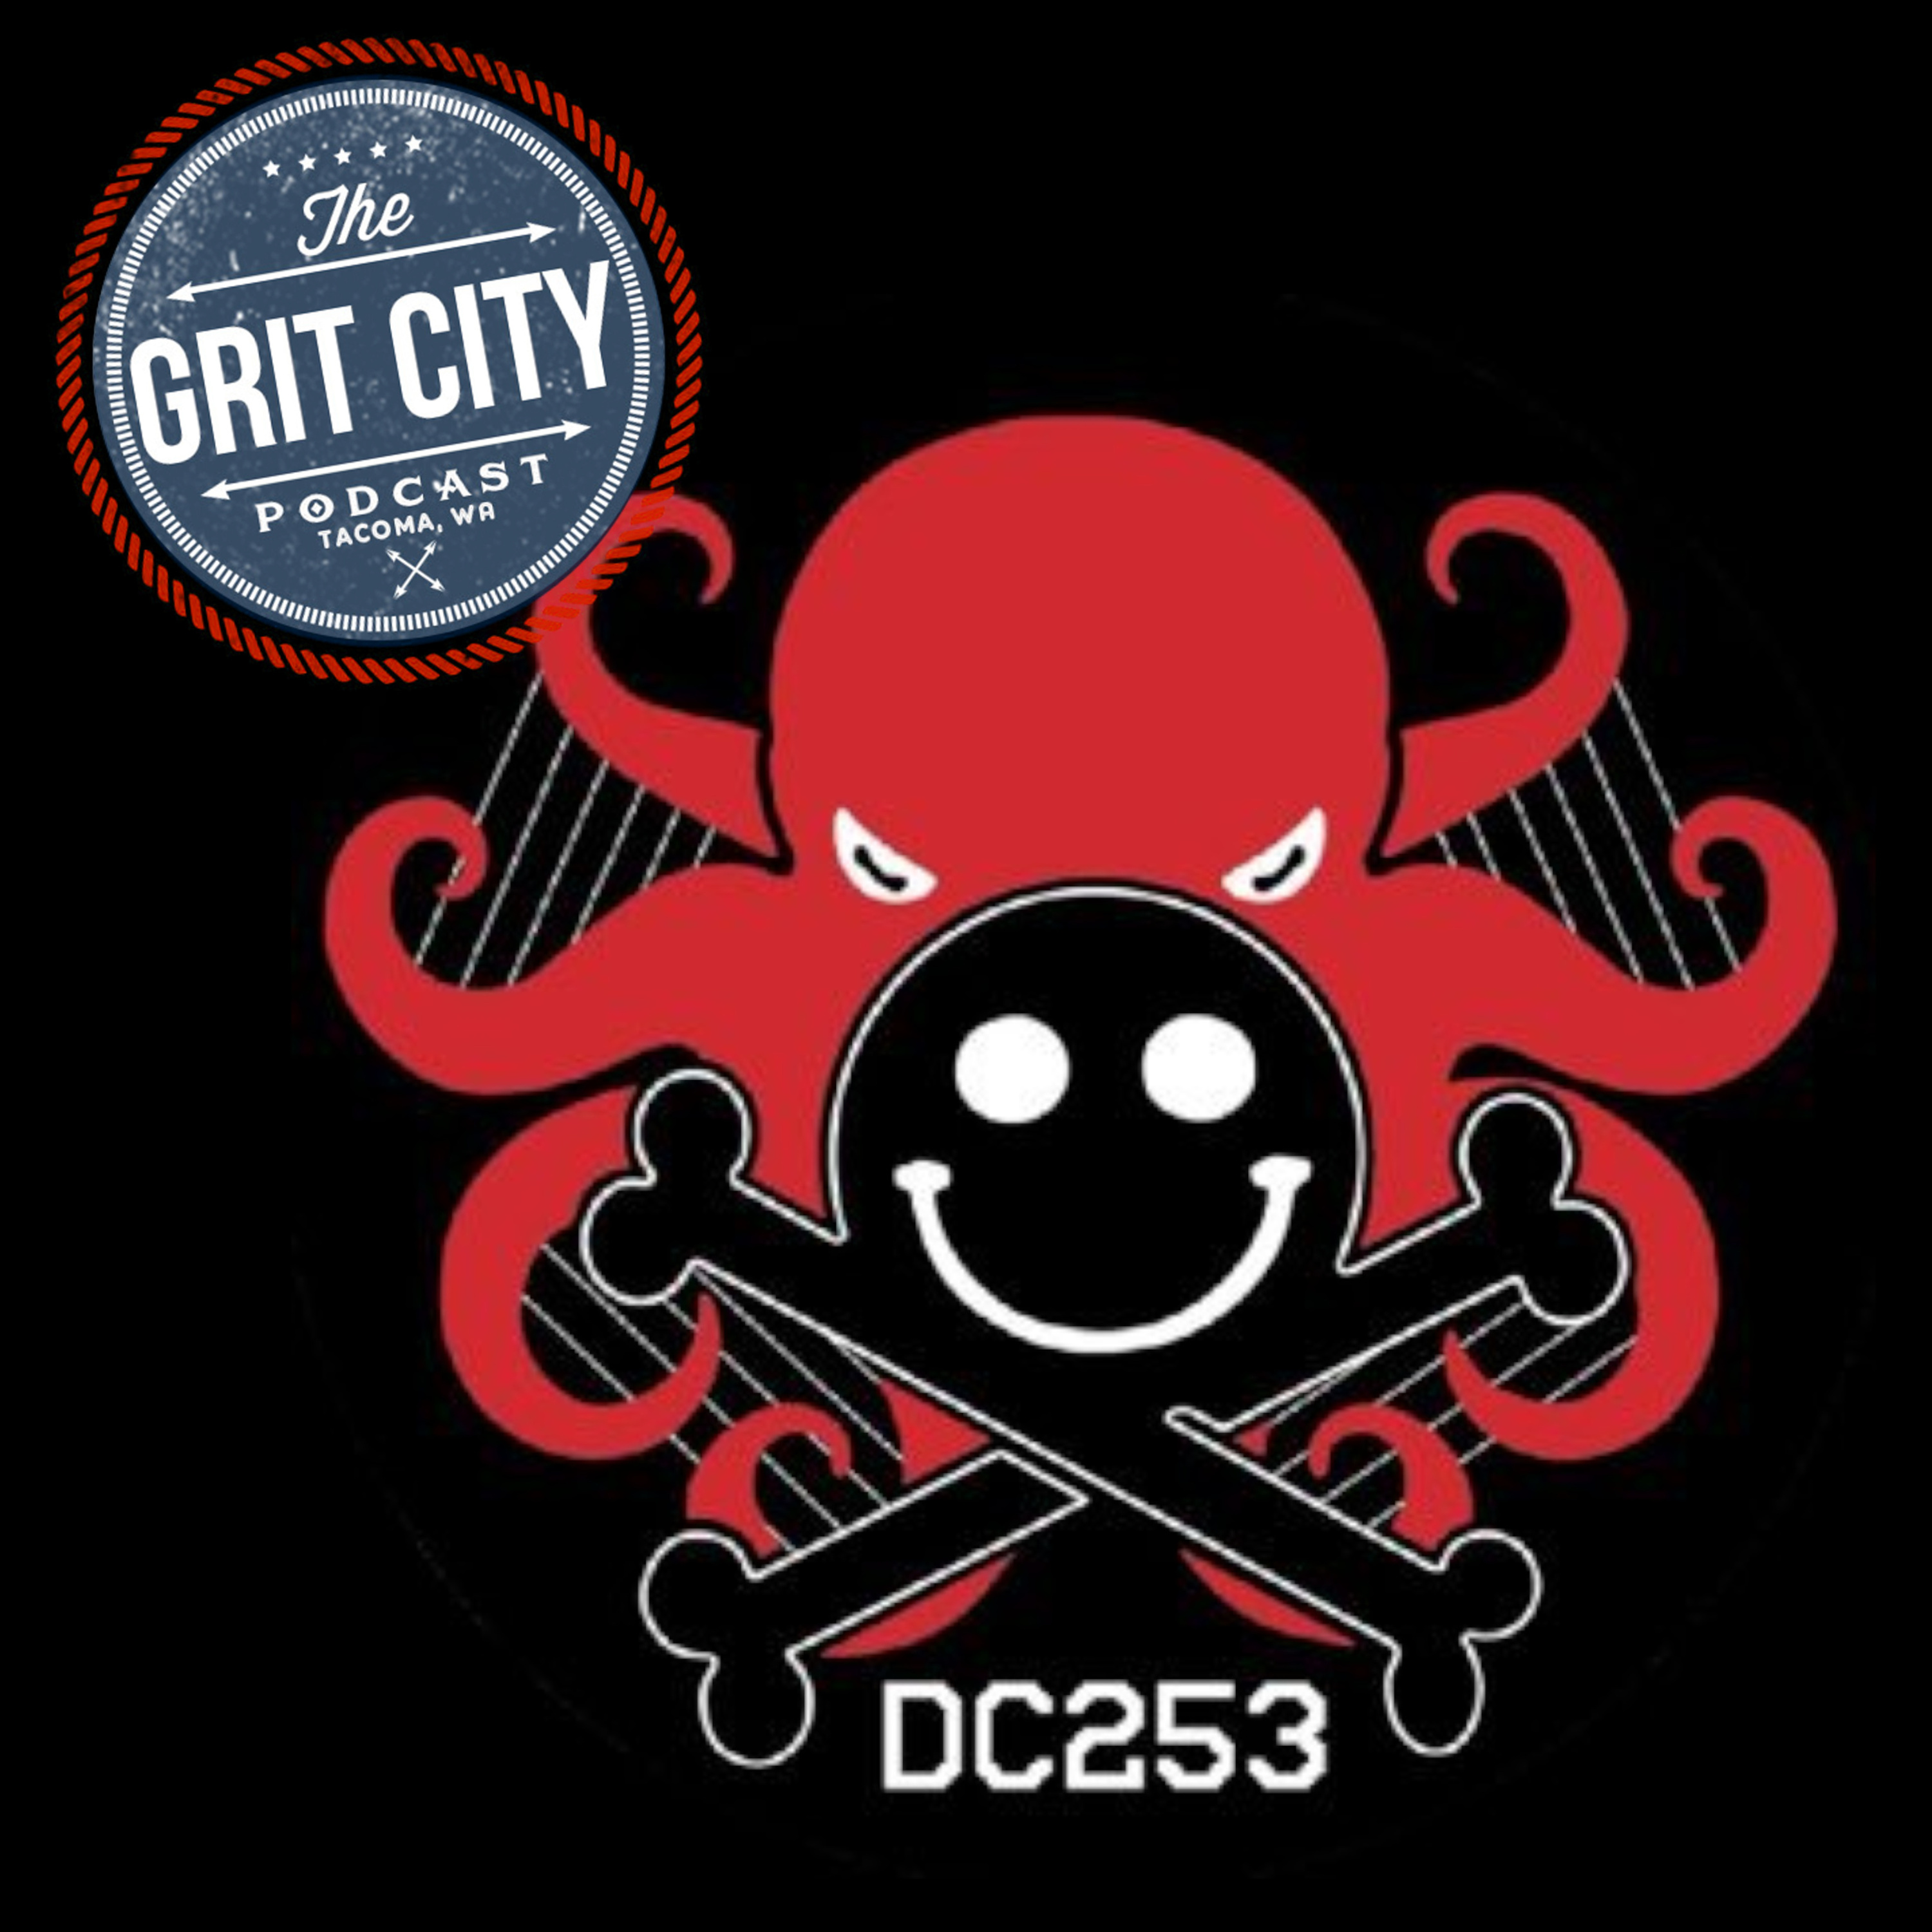 DC253 - Tacoma's DEF CON Group